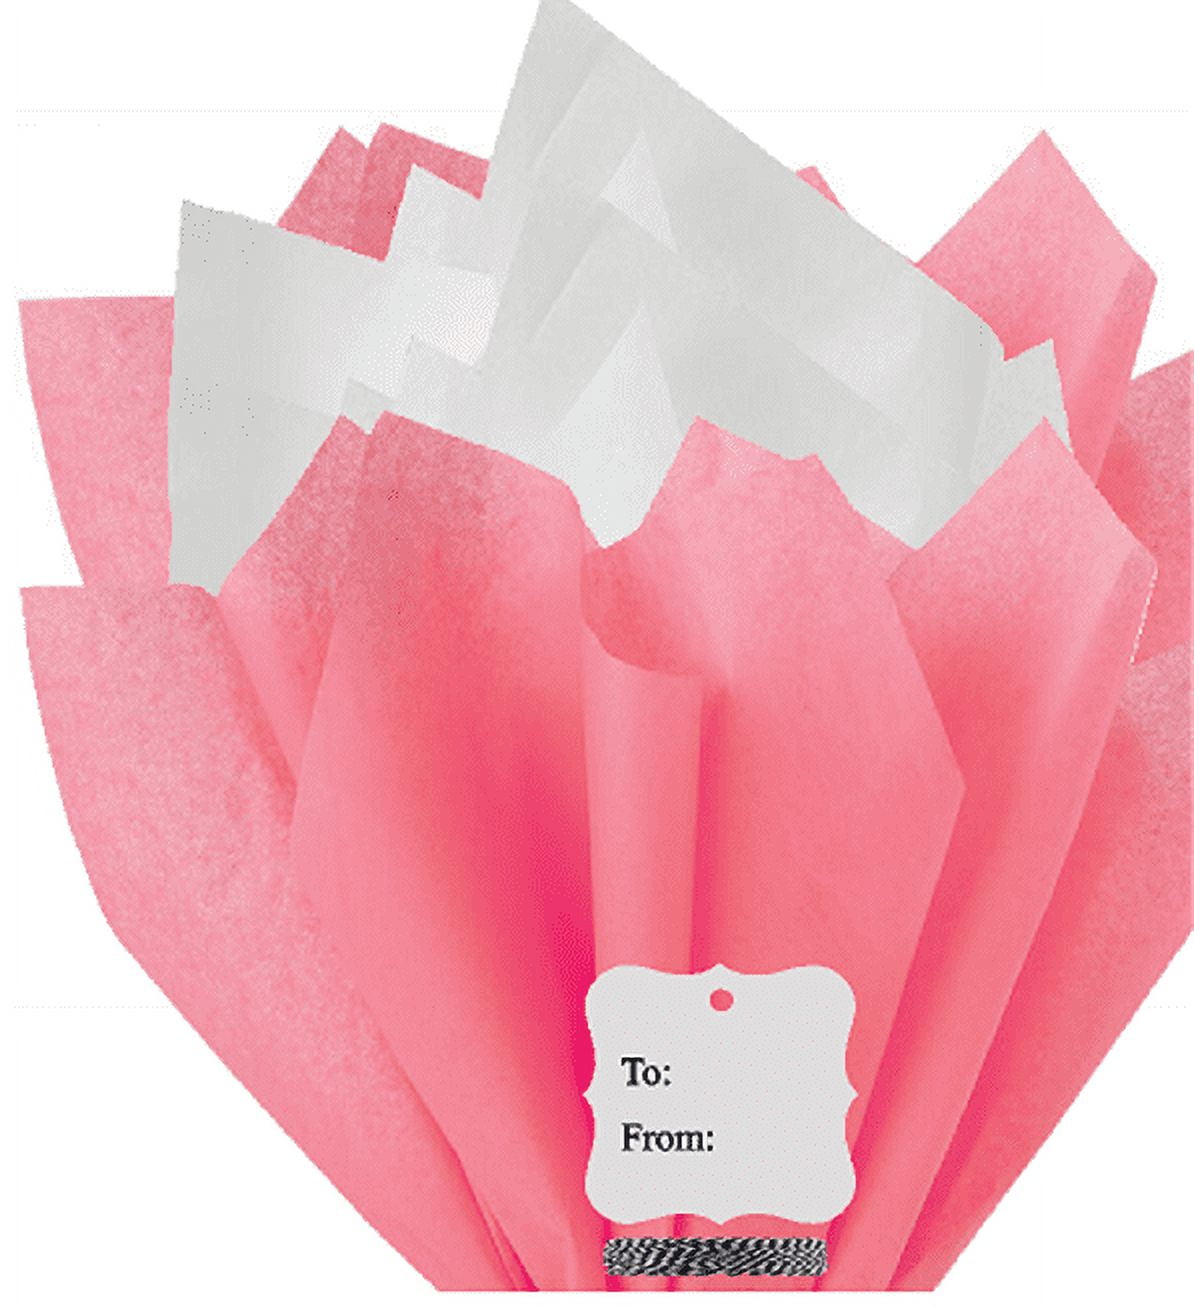 Celebrate Next Sage Green and White Gift Wrap Pom Pom Tissue Paper Mix with 12 to from Gift Tags